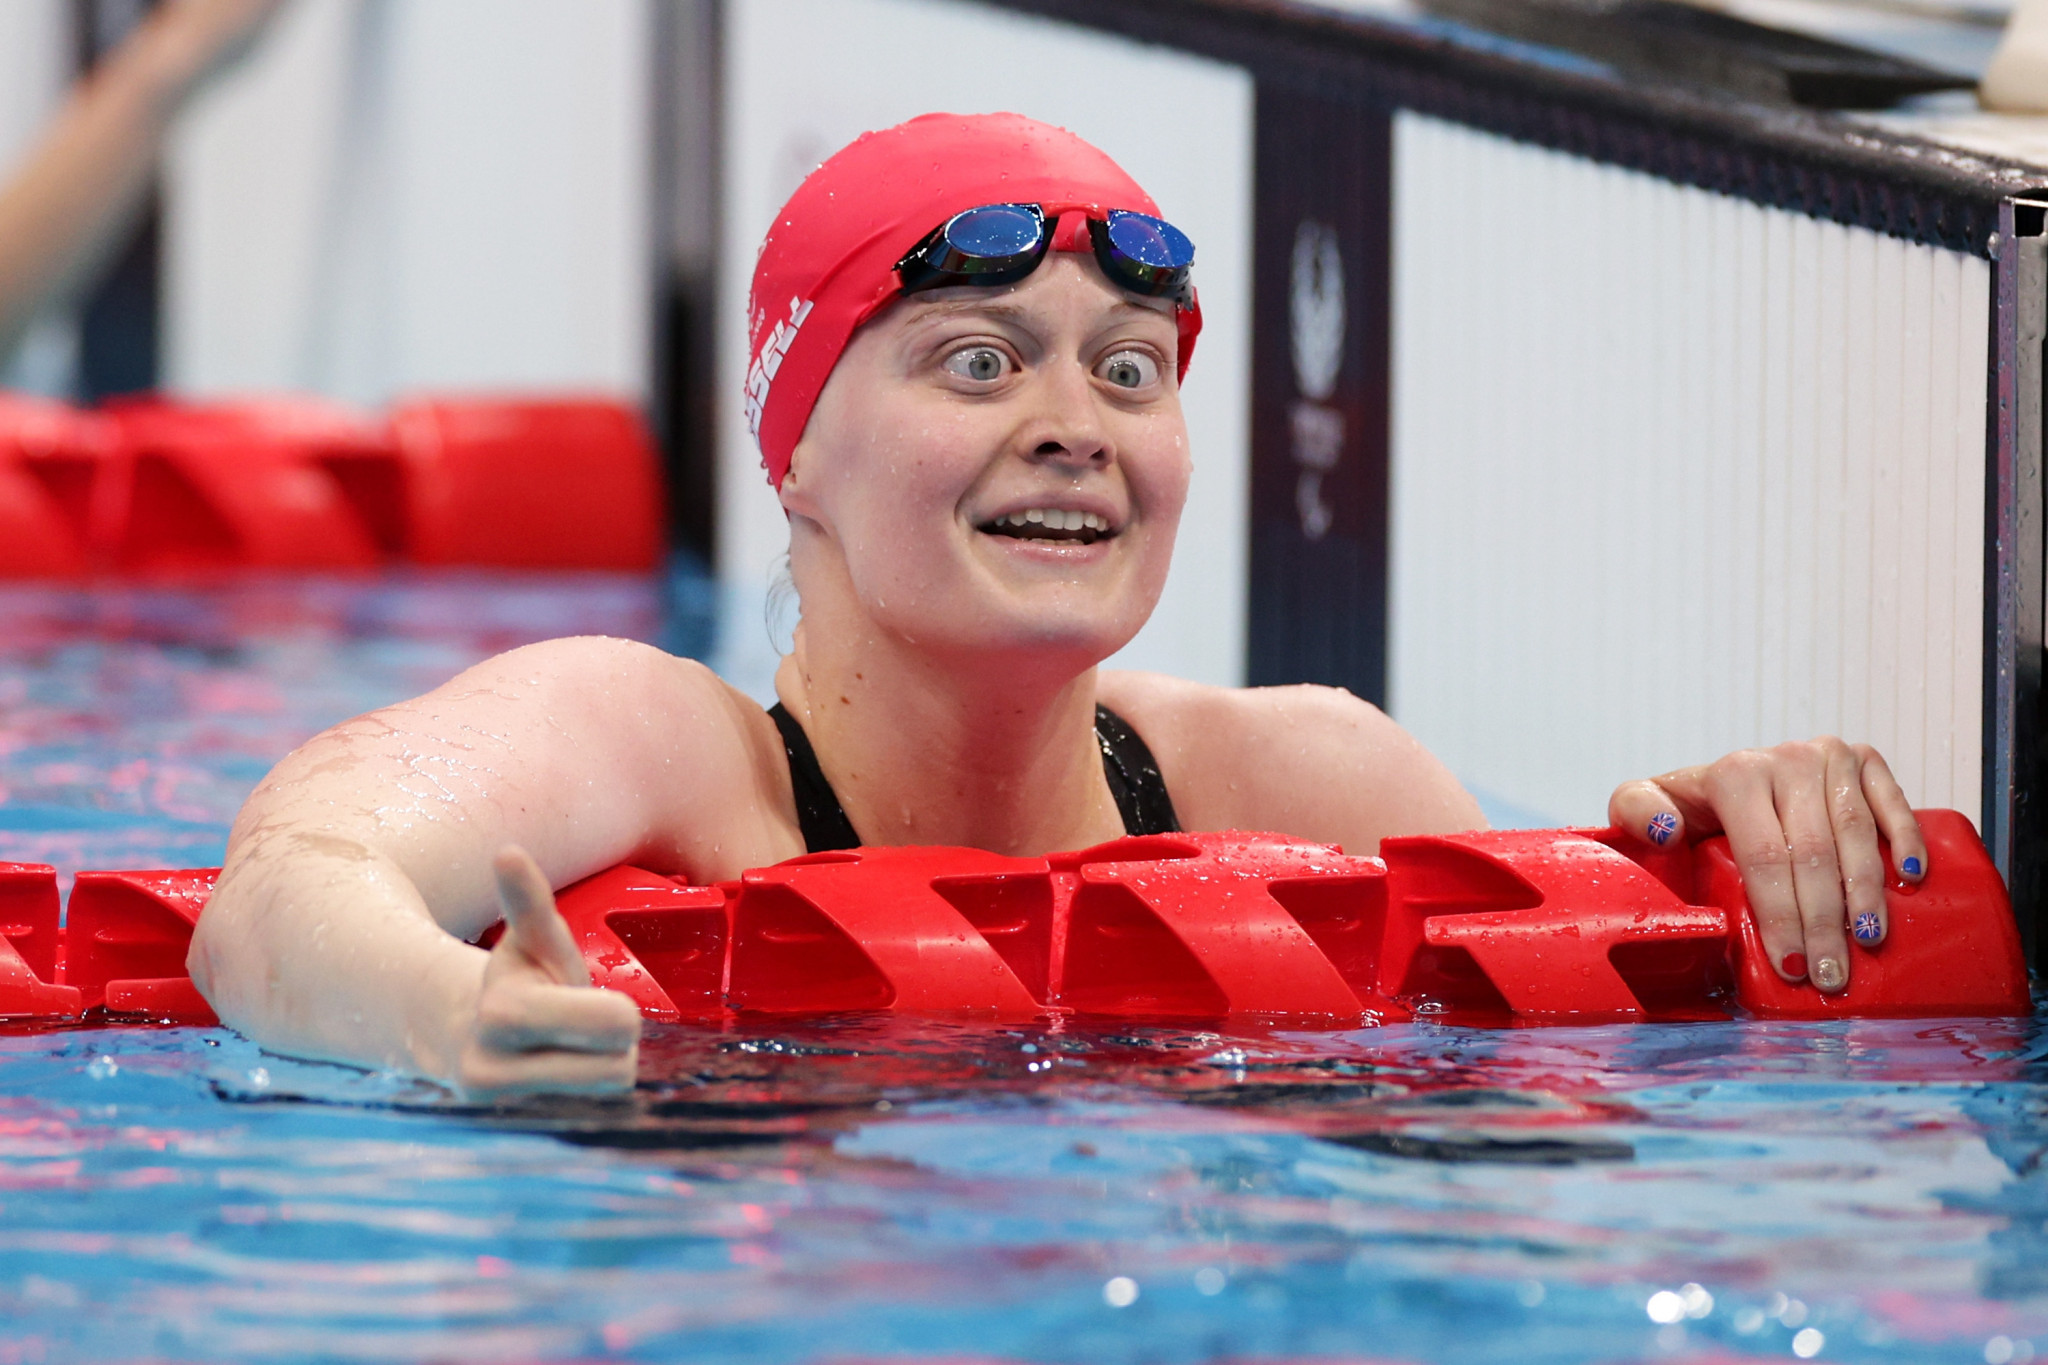 Three-time Para swimming champion Russell retires